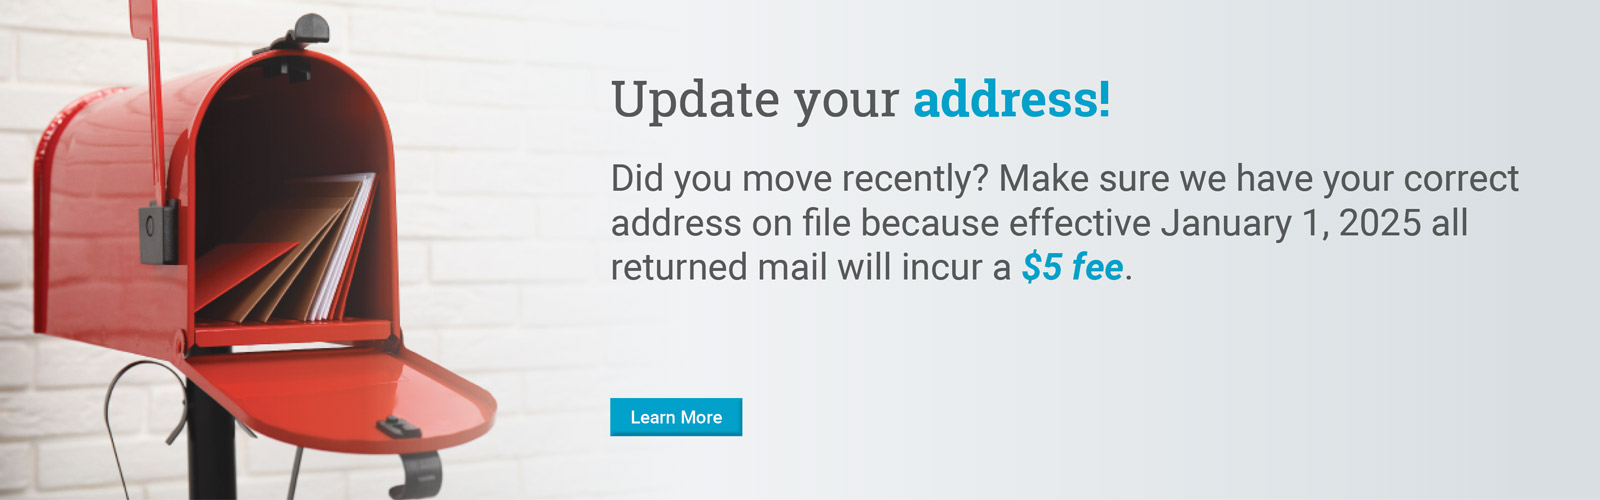 Update your address!

Did you move recently? Make sure we have your correct address on file because effective January 1, 2025 all returned mail will incur a $5 fee.